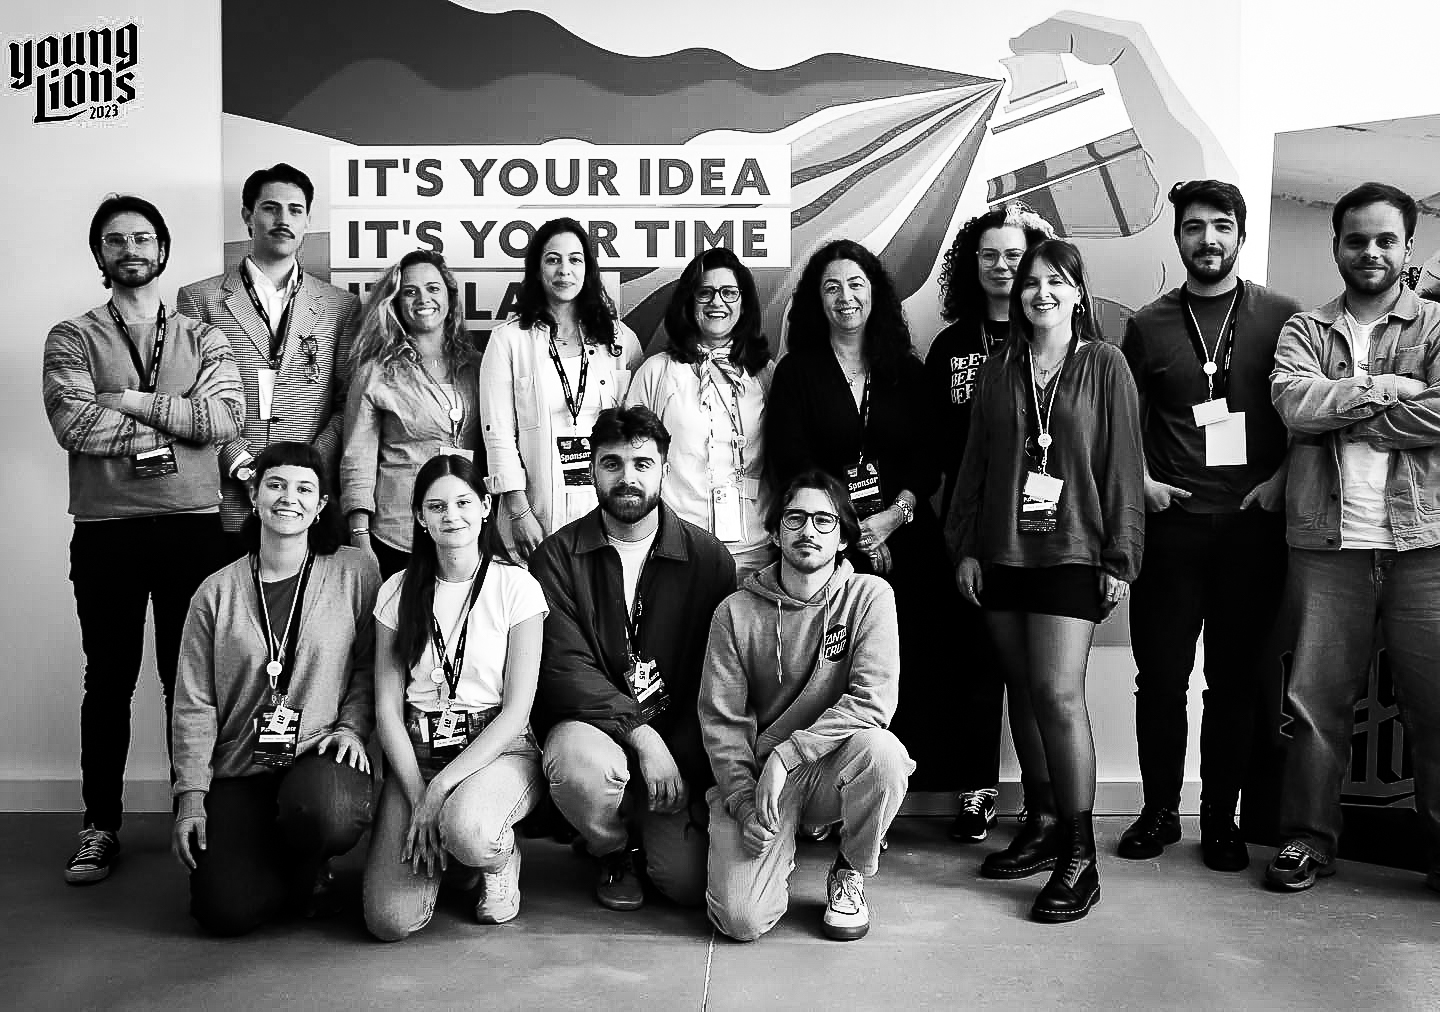 Duo competitors featuring MDGPE's students Margarida Silva, LDC alumnus Mariana Carvalhais, MDGPE Alexandre Sousa and Jorge Moreira (bottom row) at Young Lions. © https://www.instagram.com/p/CrDIv7csNrn/